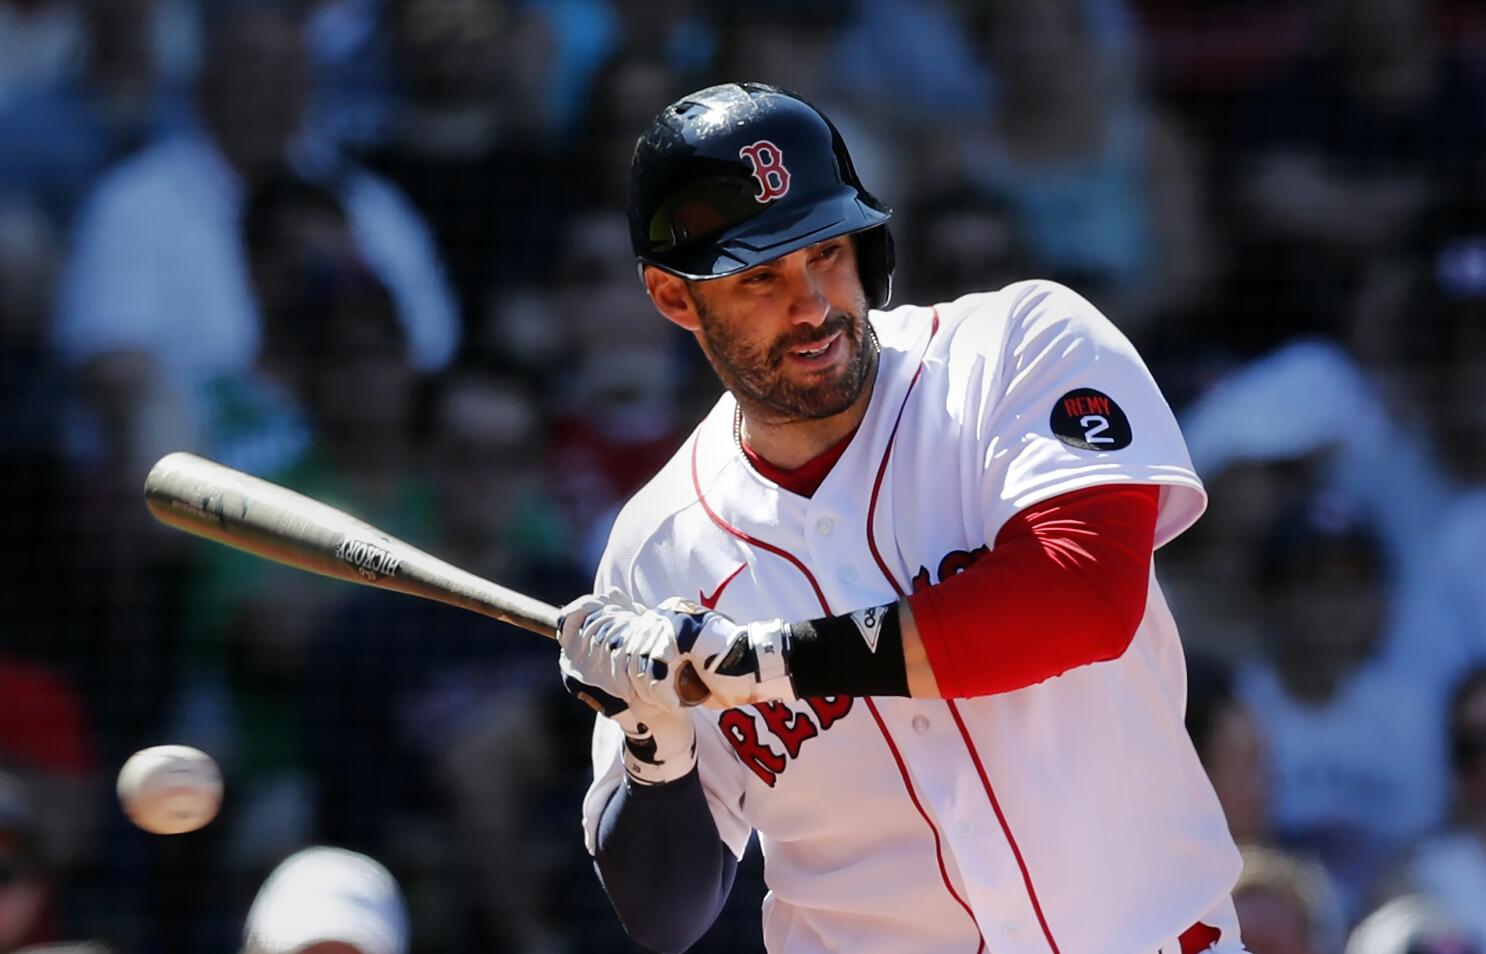 A week after agreement, J.D. Martinez, Red Sox make it official: 'It's